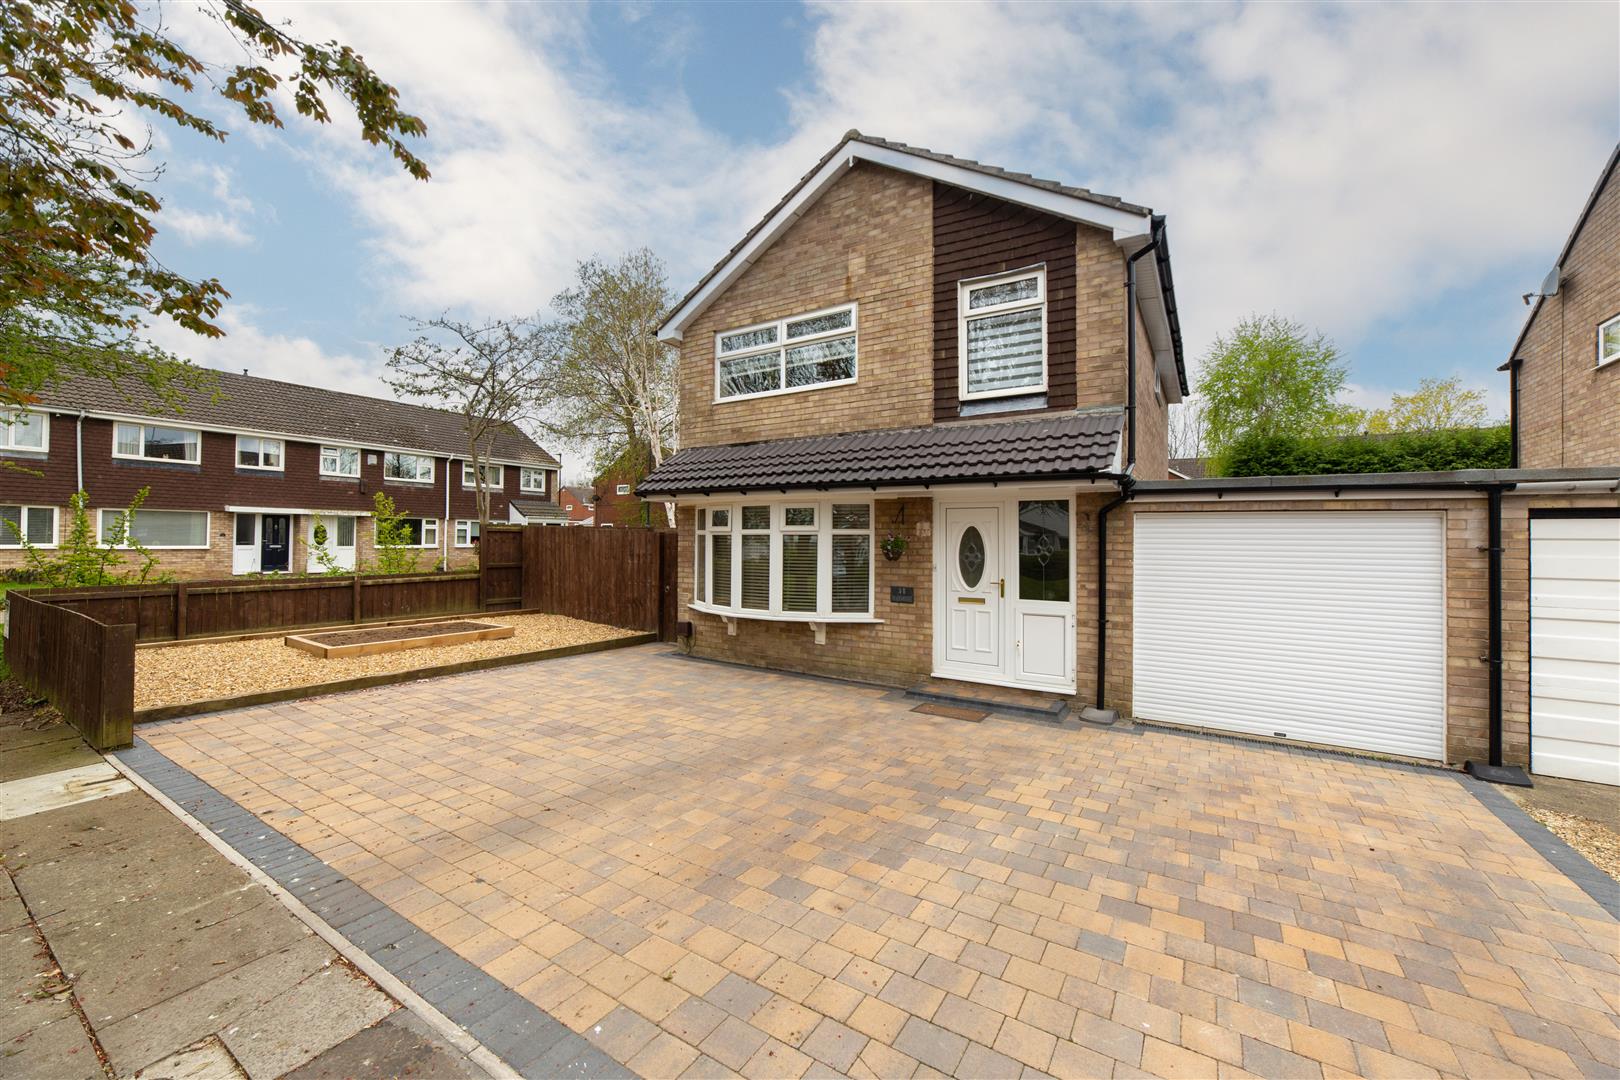 3 bed detached house for sale in Yeadon Court, Kingston Park, NE3 